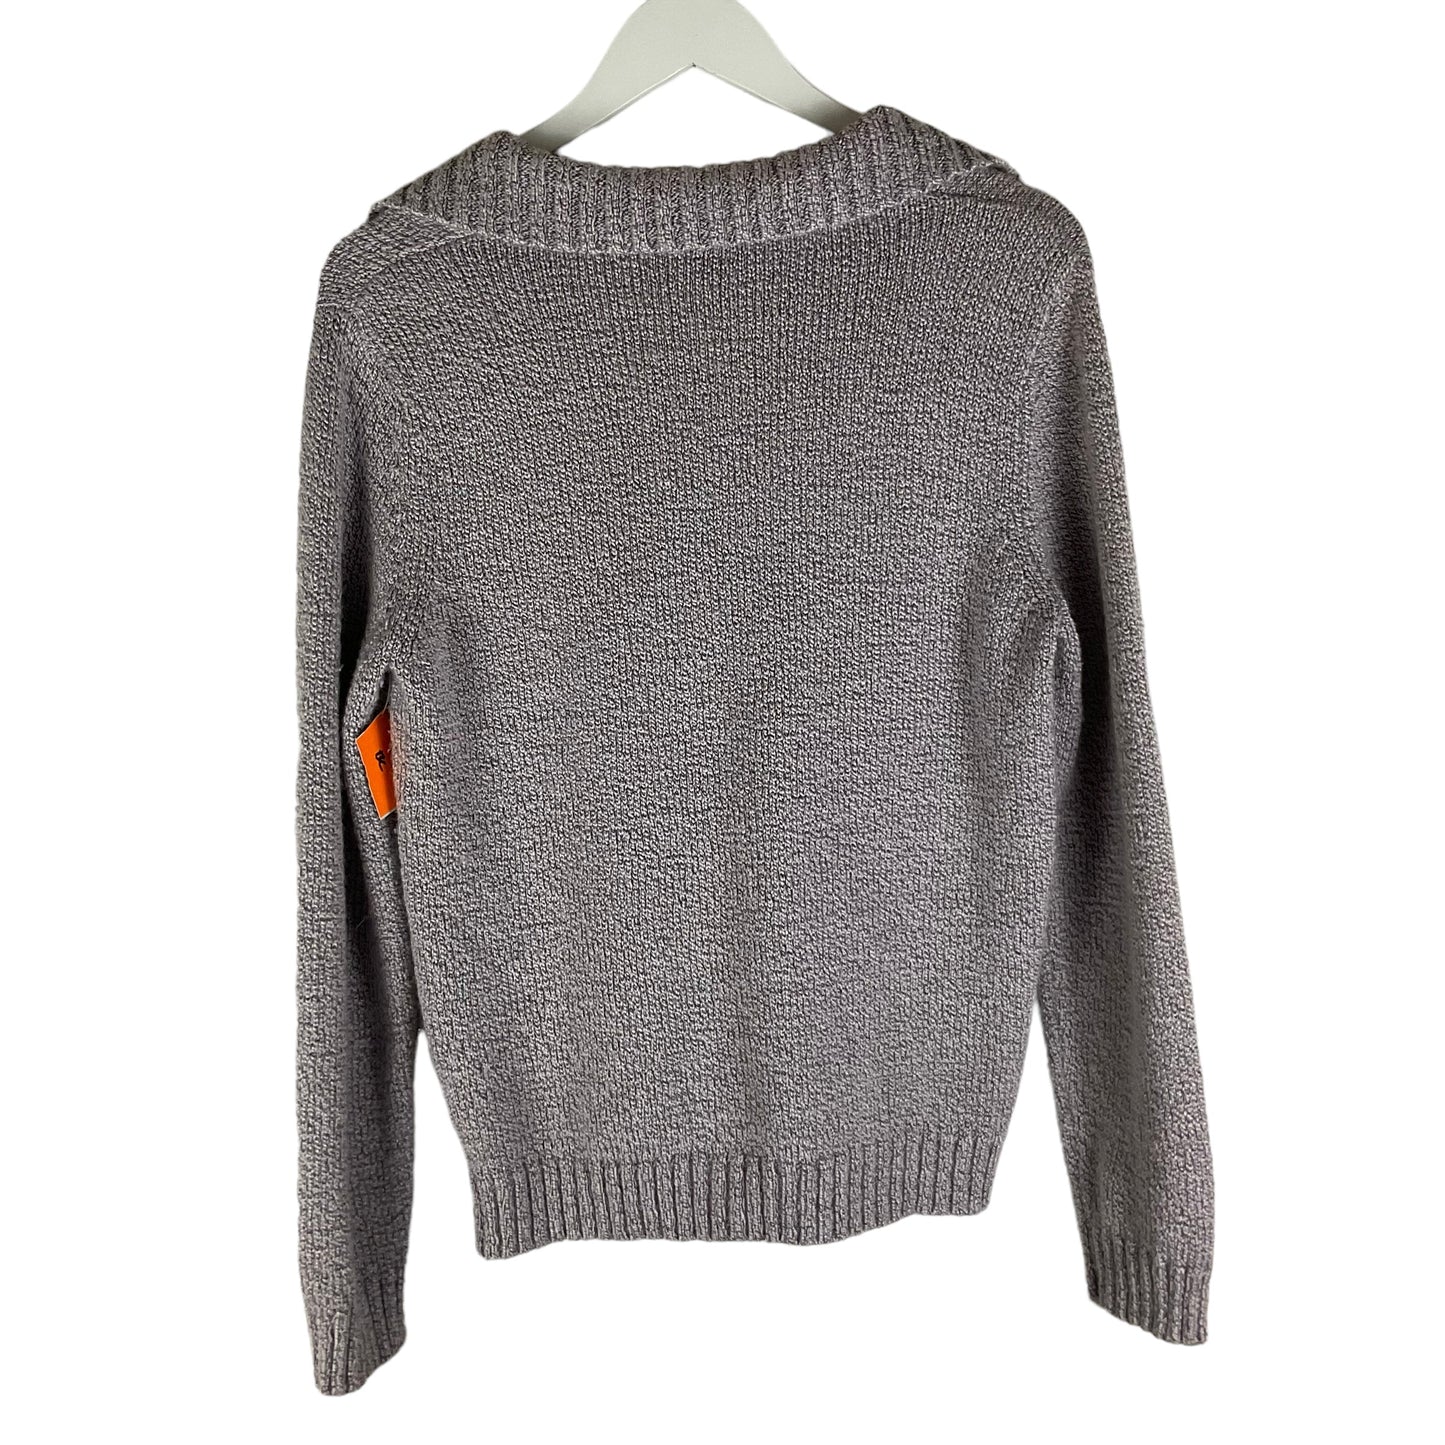 Sweater By St John Collection  Size: L